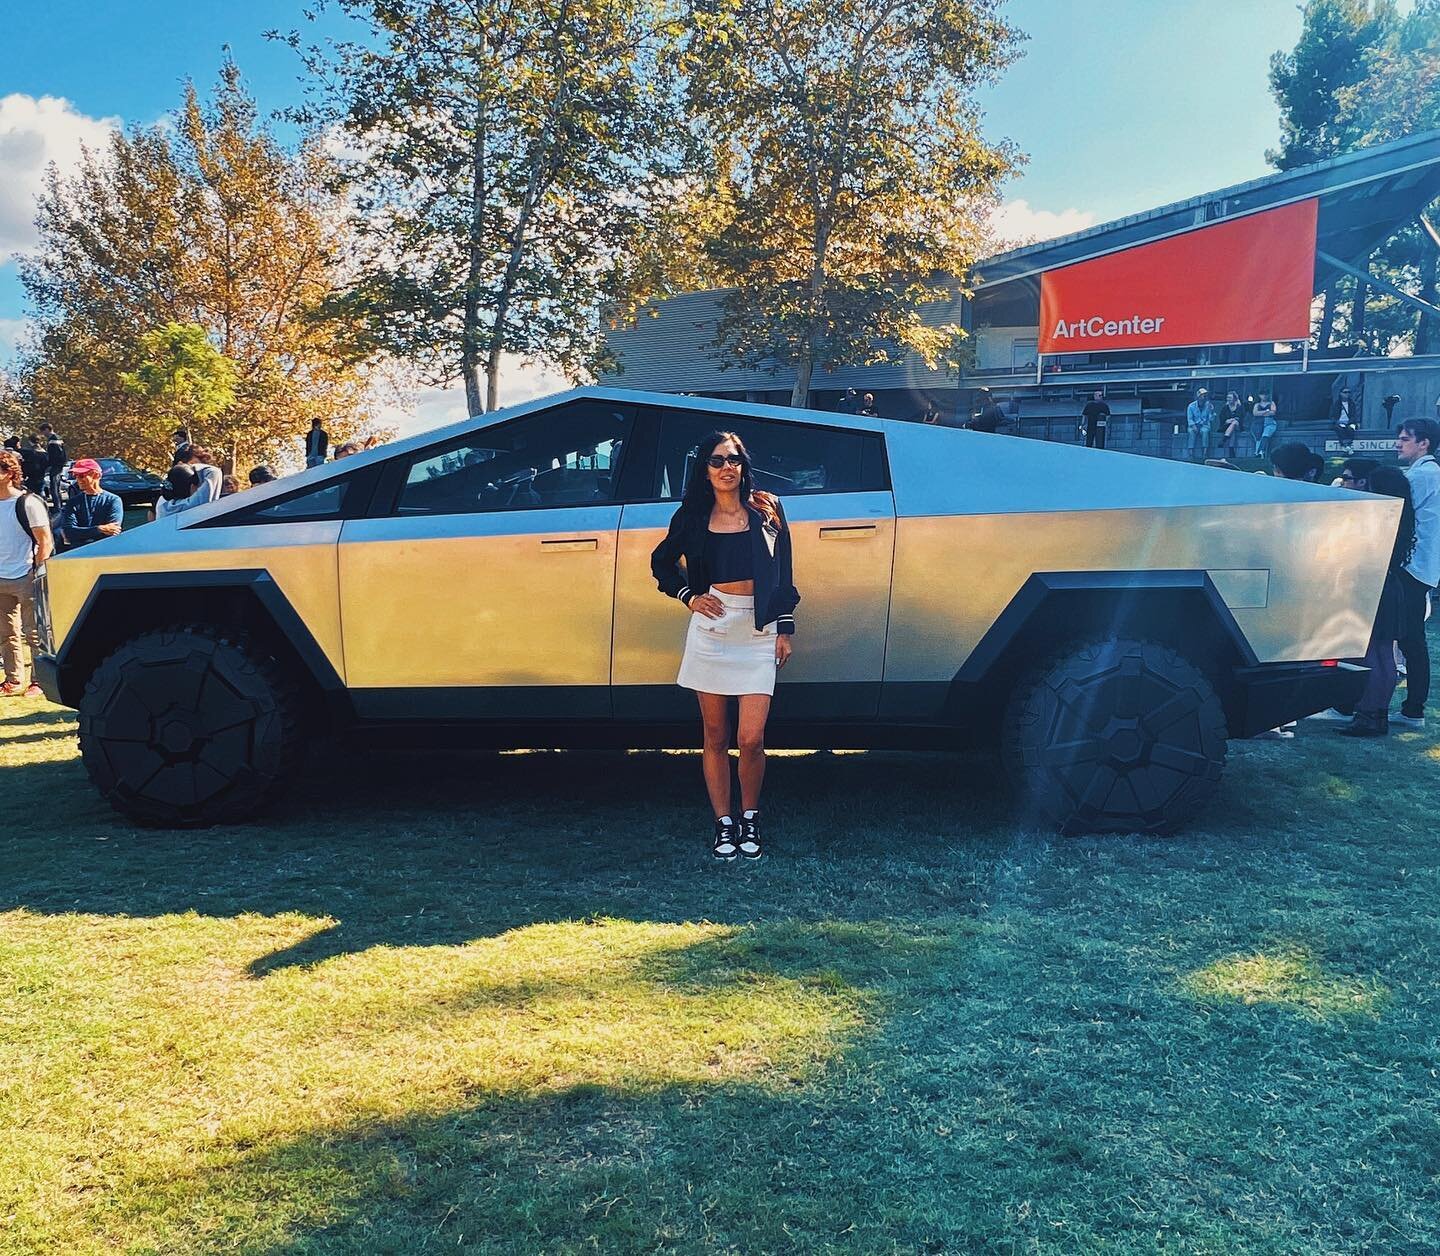 Cyber WHAT!?!? This @teslamotors Cyber Truck makes me look even more petite. Very impressive event @artcenteredu 
So great to see so many industry friends. Keep watching this week for more 🔥

📸 @dan_j_x013 
#cybertruck #cardesign #artcenter #car #t